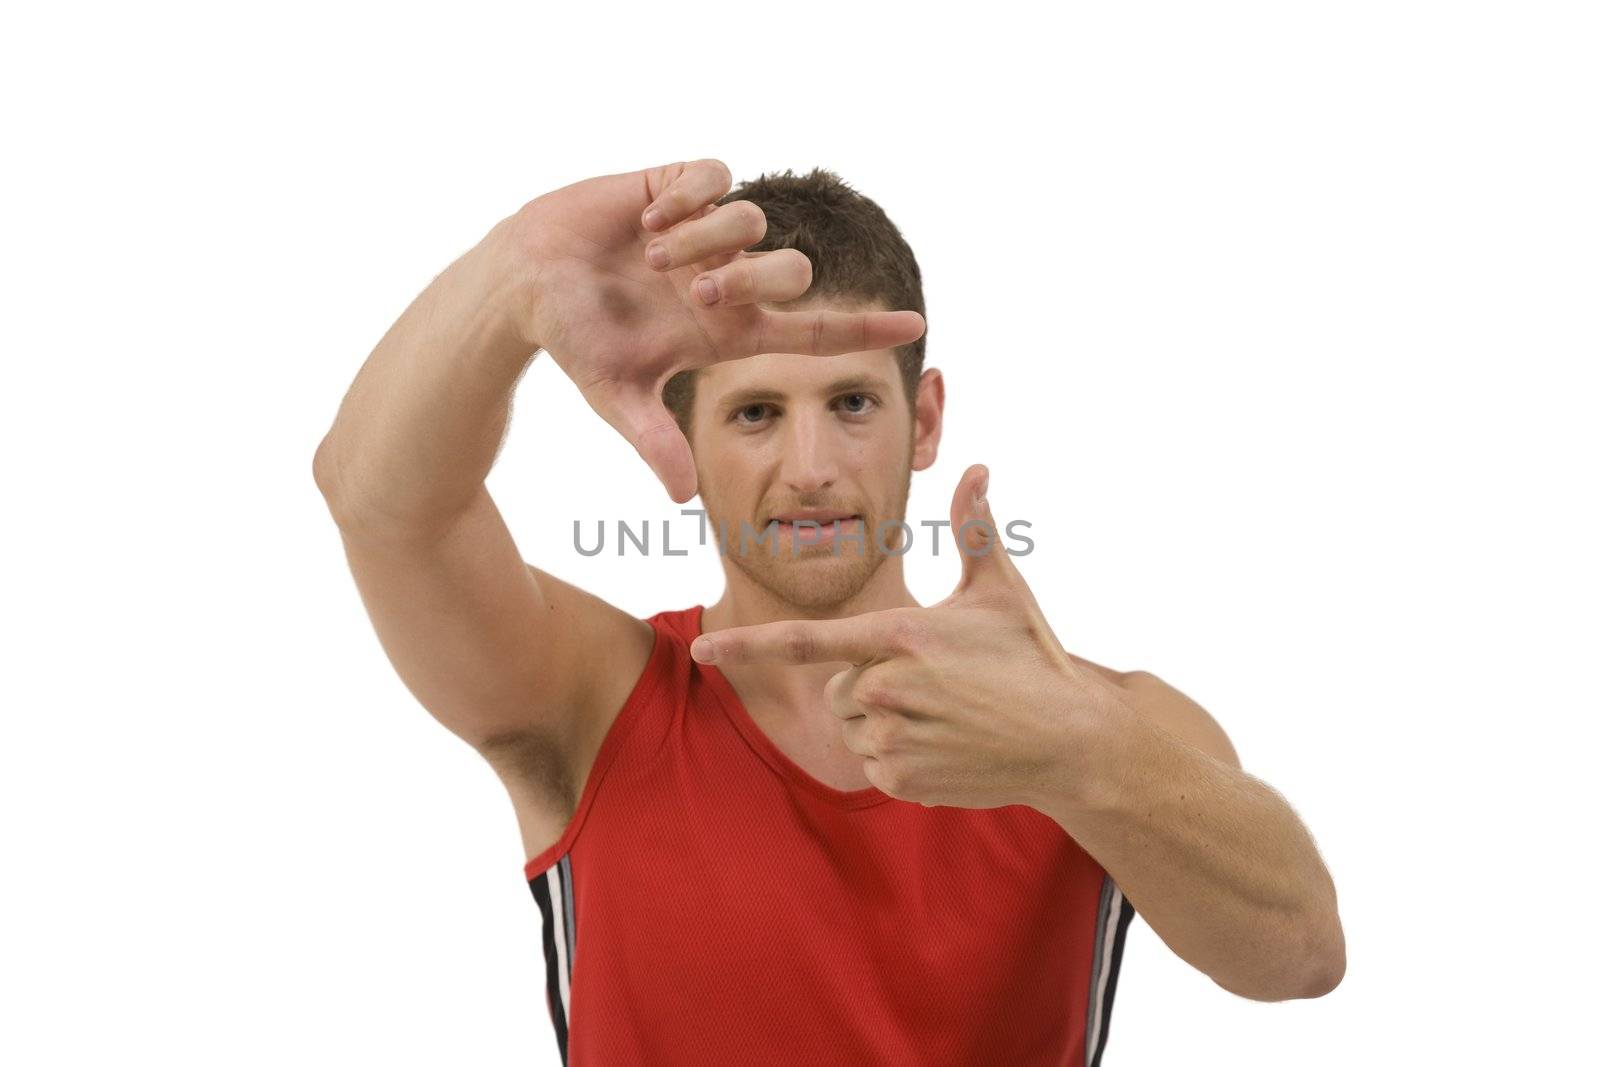 adult man showing framing gesture on isolated background